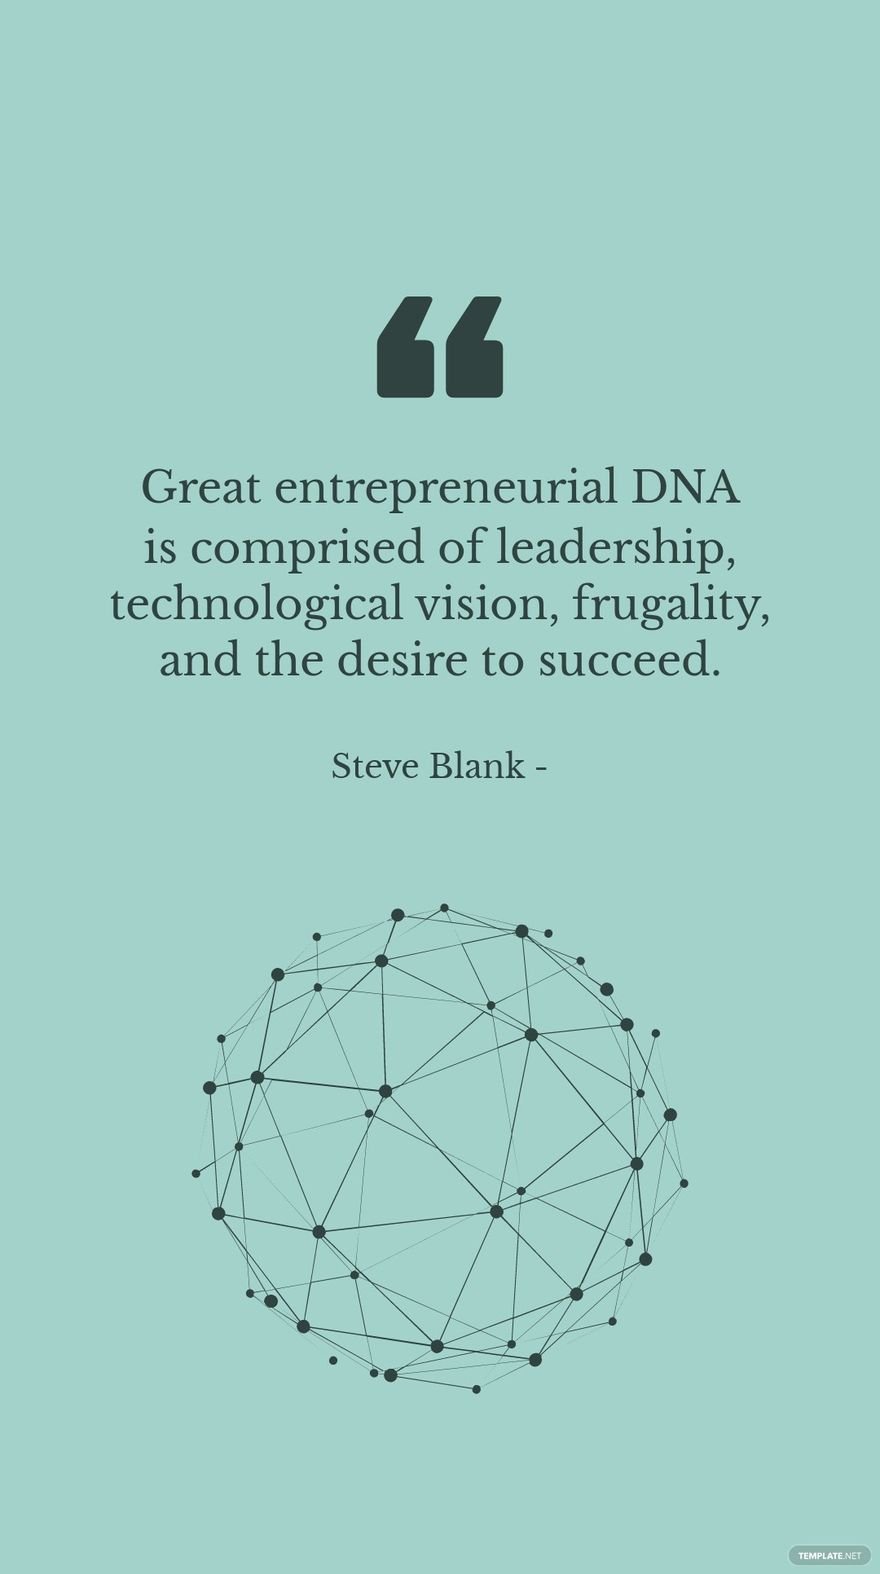 Steve Blank - Great entrepreneurial DNA is comprised of leadership, technological vision, frugality, and the desire to succeed.